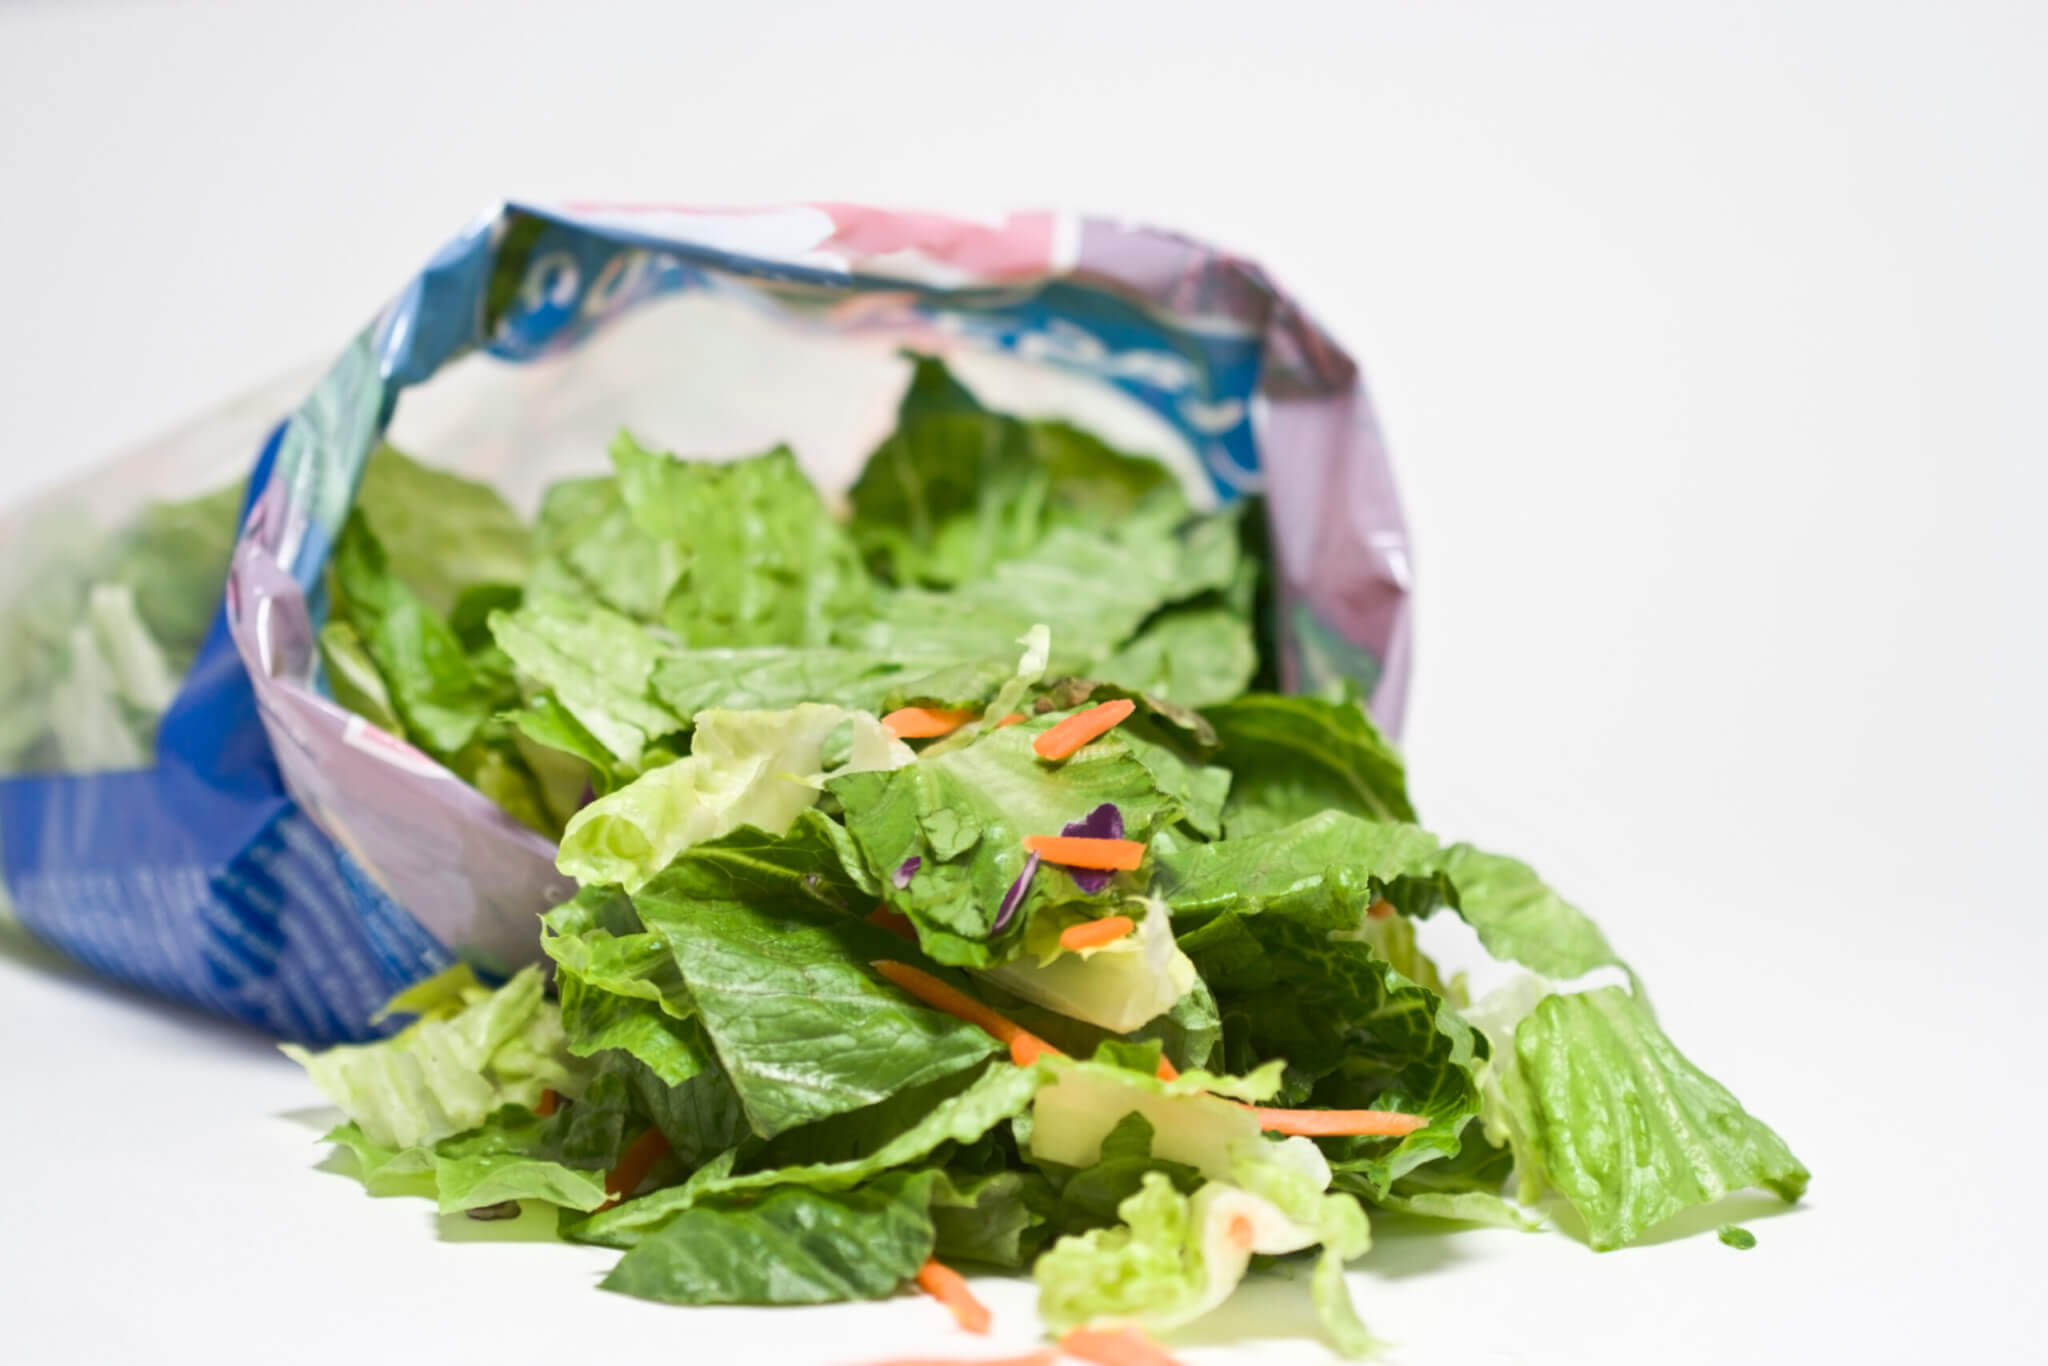 Open bag of salad with lettuce on table